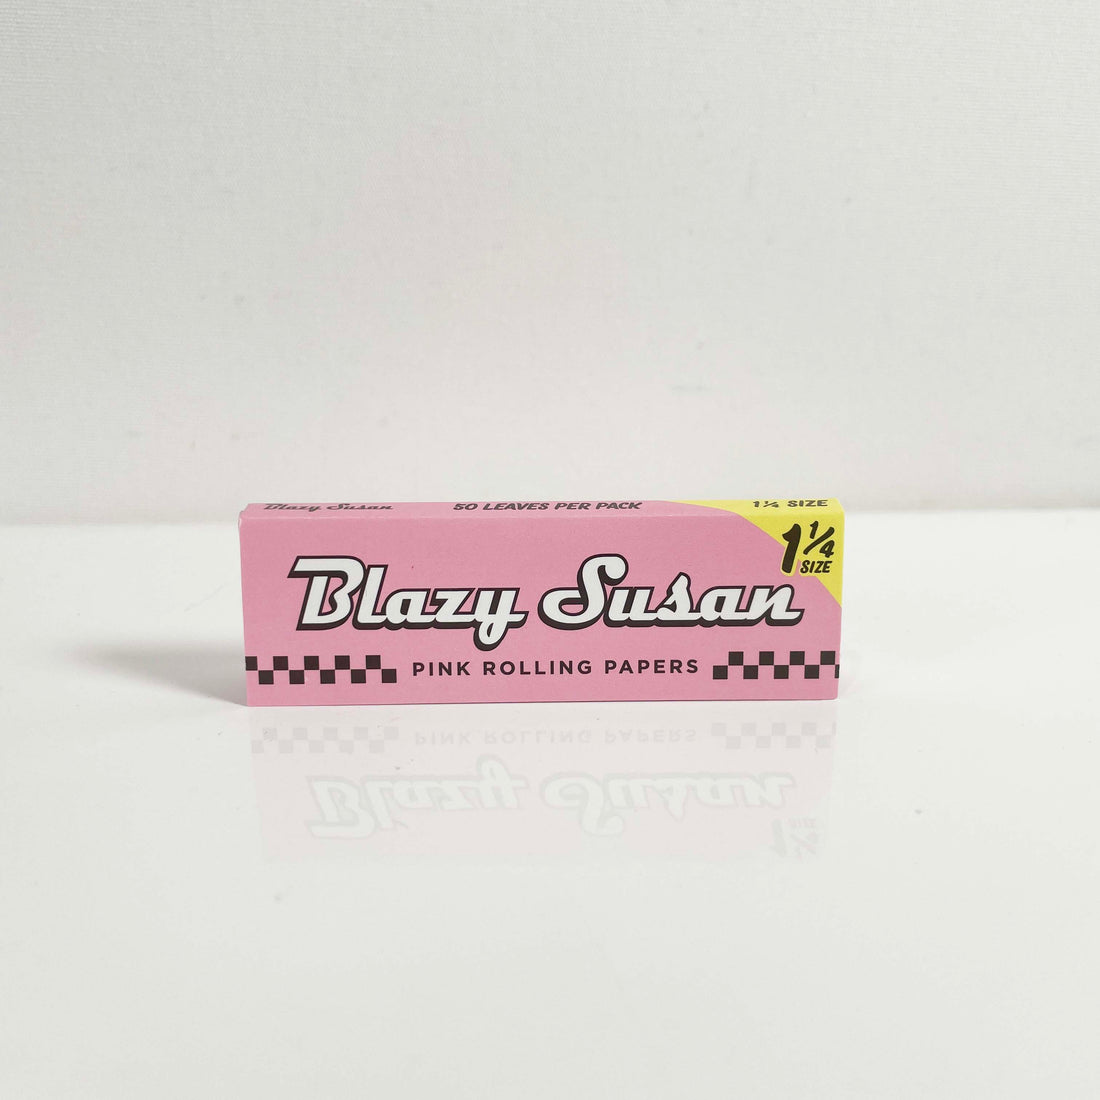 blazy susan 1.25 pink rolling papers bliss shop chicago